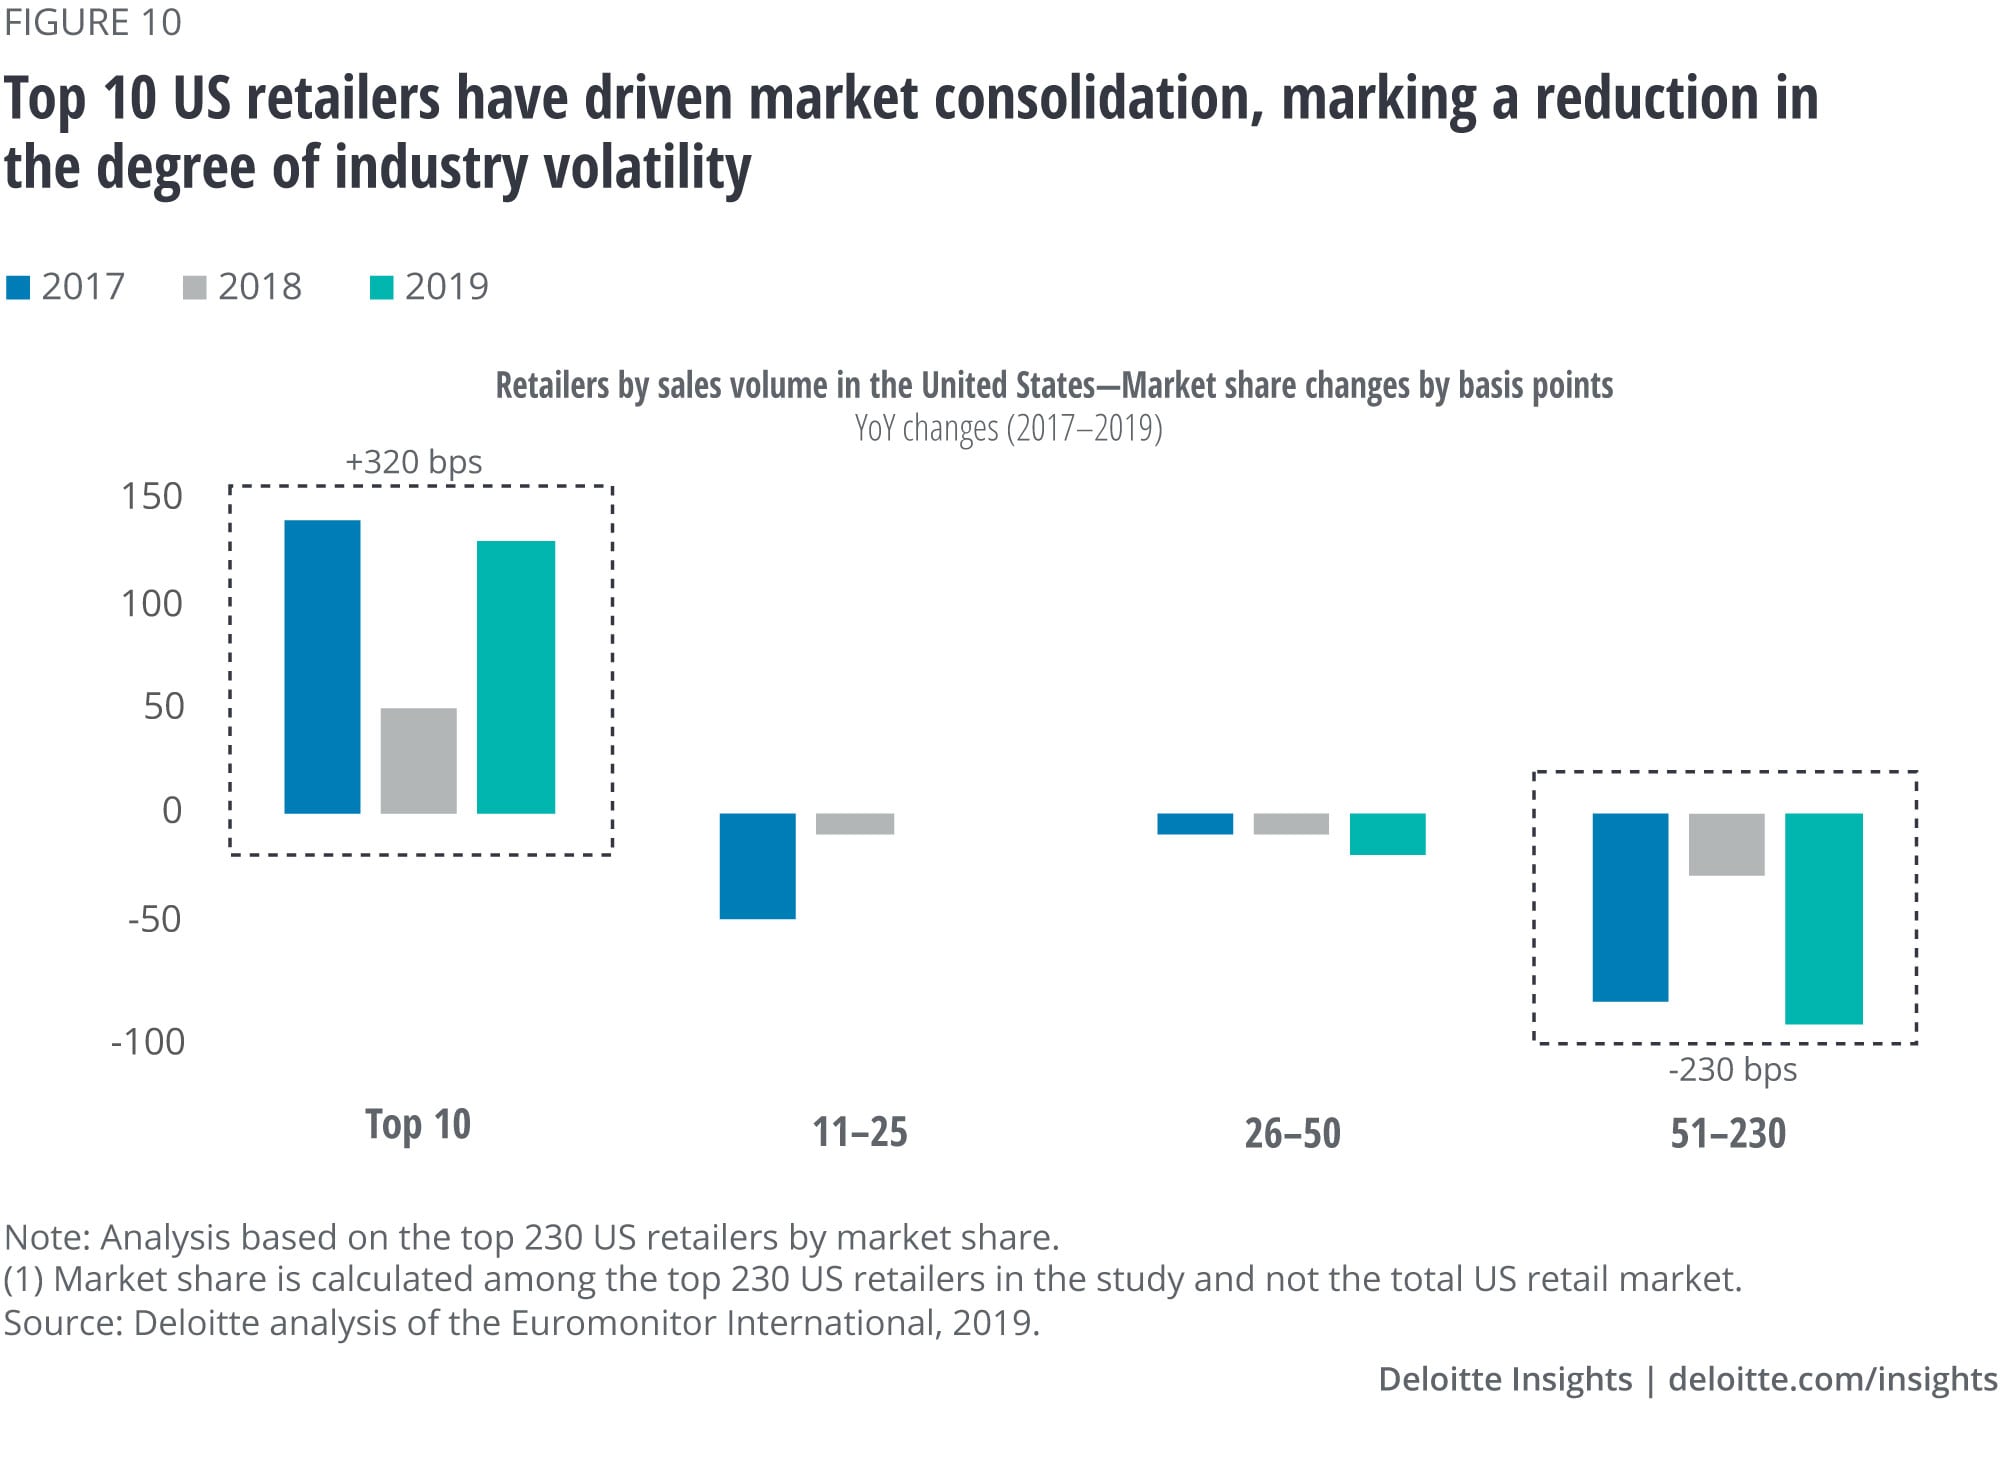 Top 10 US retailers have driven market consolidation, marking a reduction in the degree of industry disruption